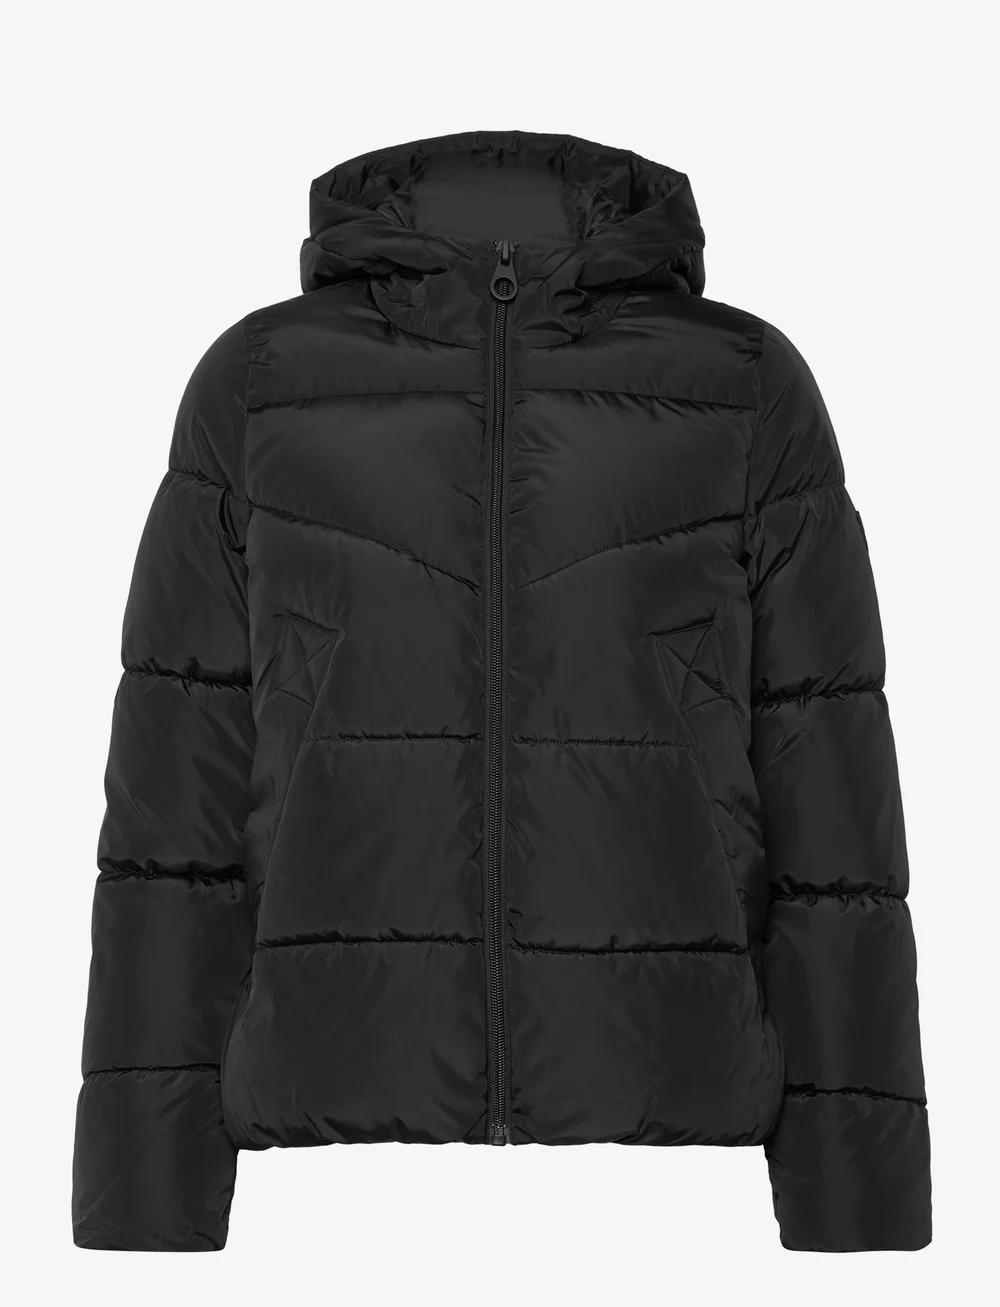 ONLY Onlnewamanda Short Jacket Cc Otw - 41.99 €. Buy Down- & padded jackets  from ONLY online at Boozt.com. Fast delivery and easy returns